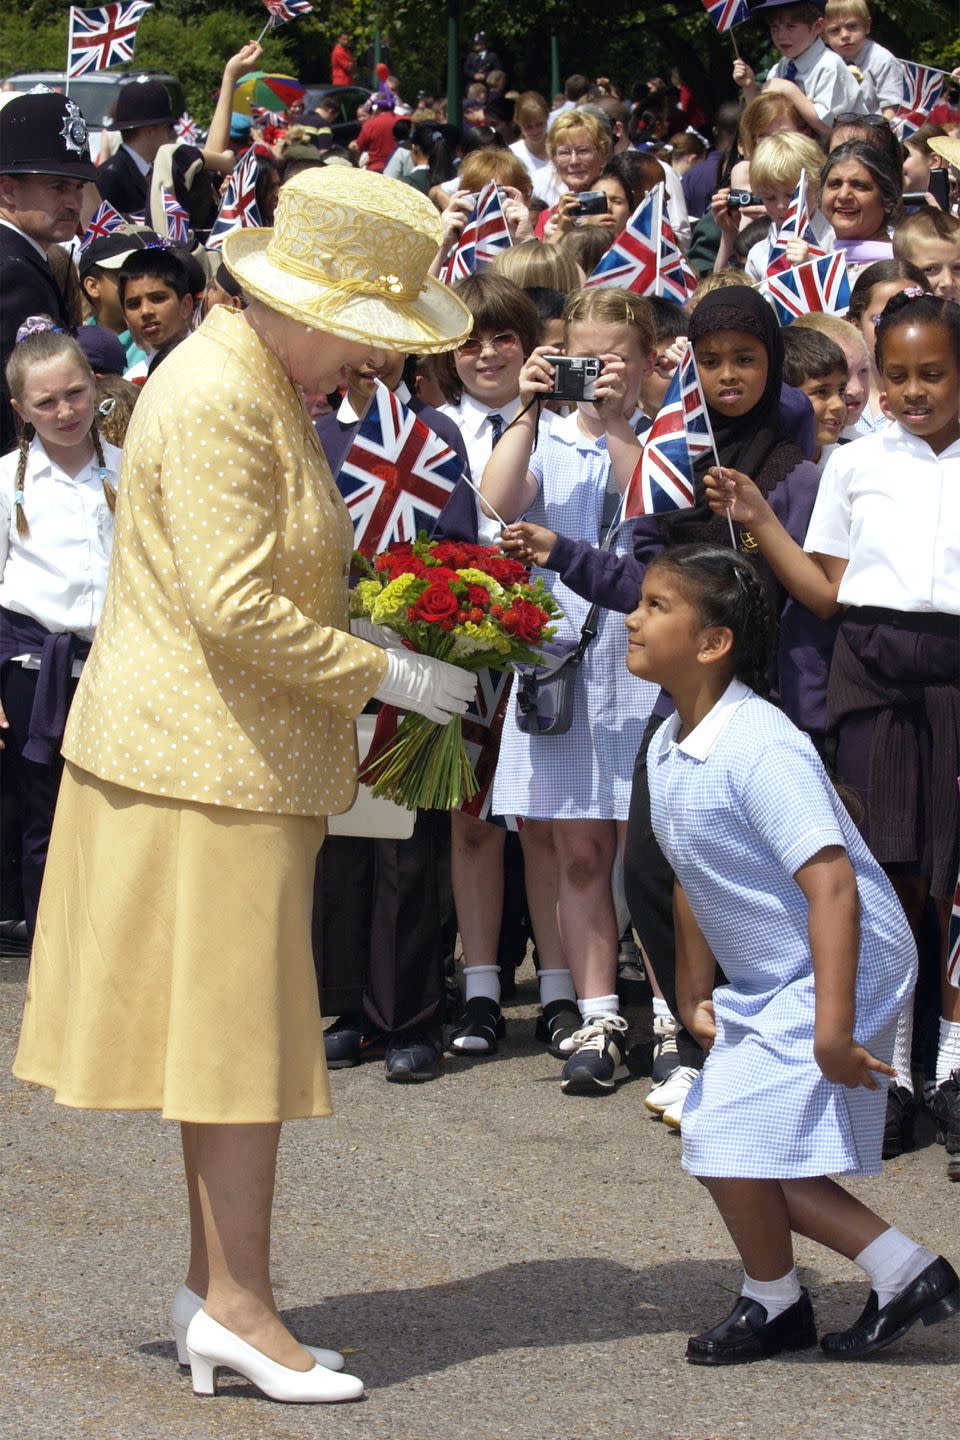 <p>QEII looked delighted to meet a young girl who greeted her with a curtsey. The royal enjoyed a picnic at Gunnersbury Park celebrating the diversity of West London.<br></p>